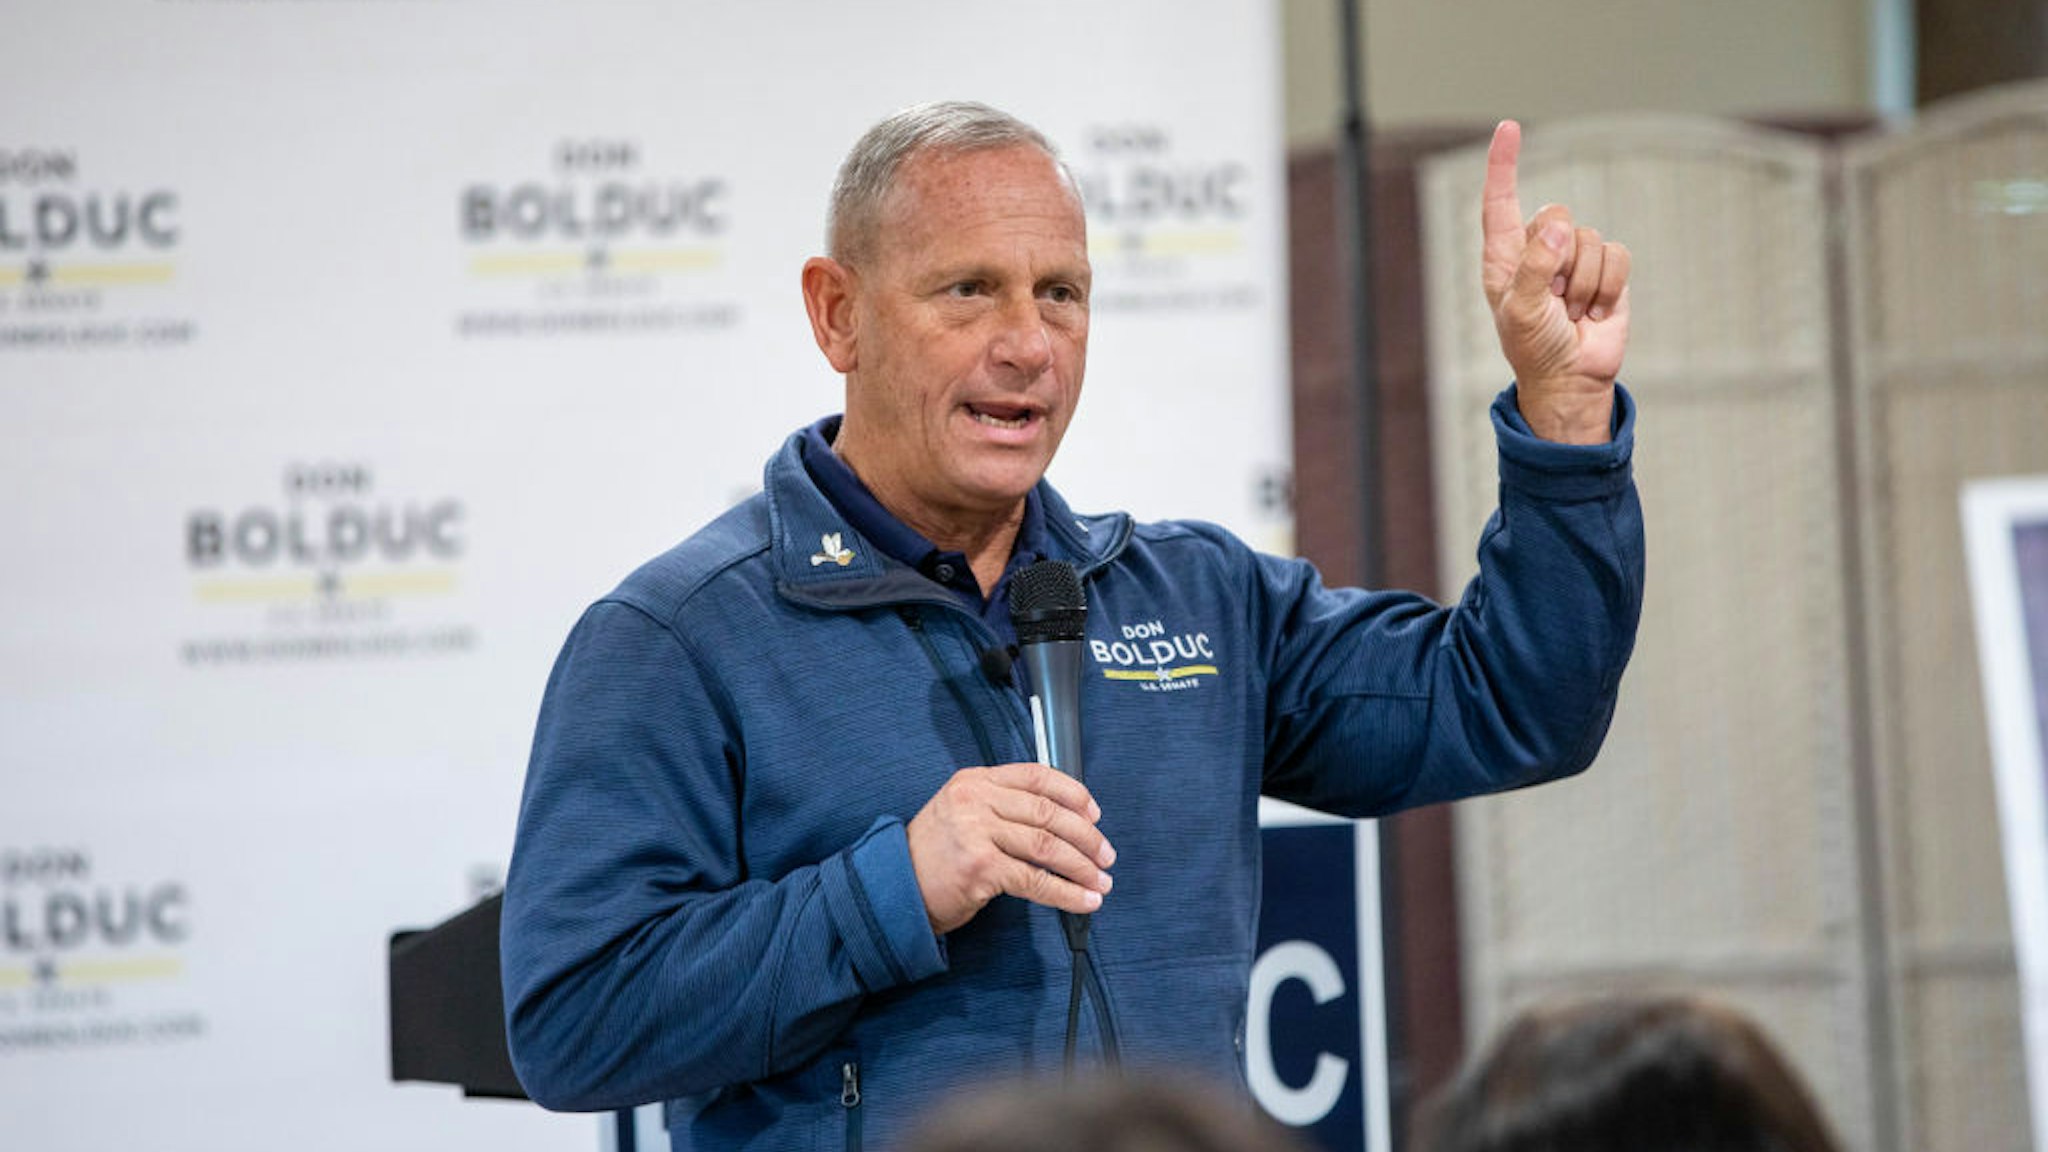 DERRY, NH - OCTOBER 15: Republican senate nominee Don Bolduc speaks during a campaign event on October 15, 2022 in Derry, New Hampshire. Bolduc, and Army General who won the GOP primary will take on Sen. Maggie Hassan (D) in November. (Photo by Scott Eisen/Getty Images)